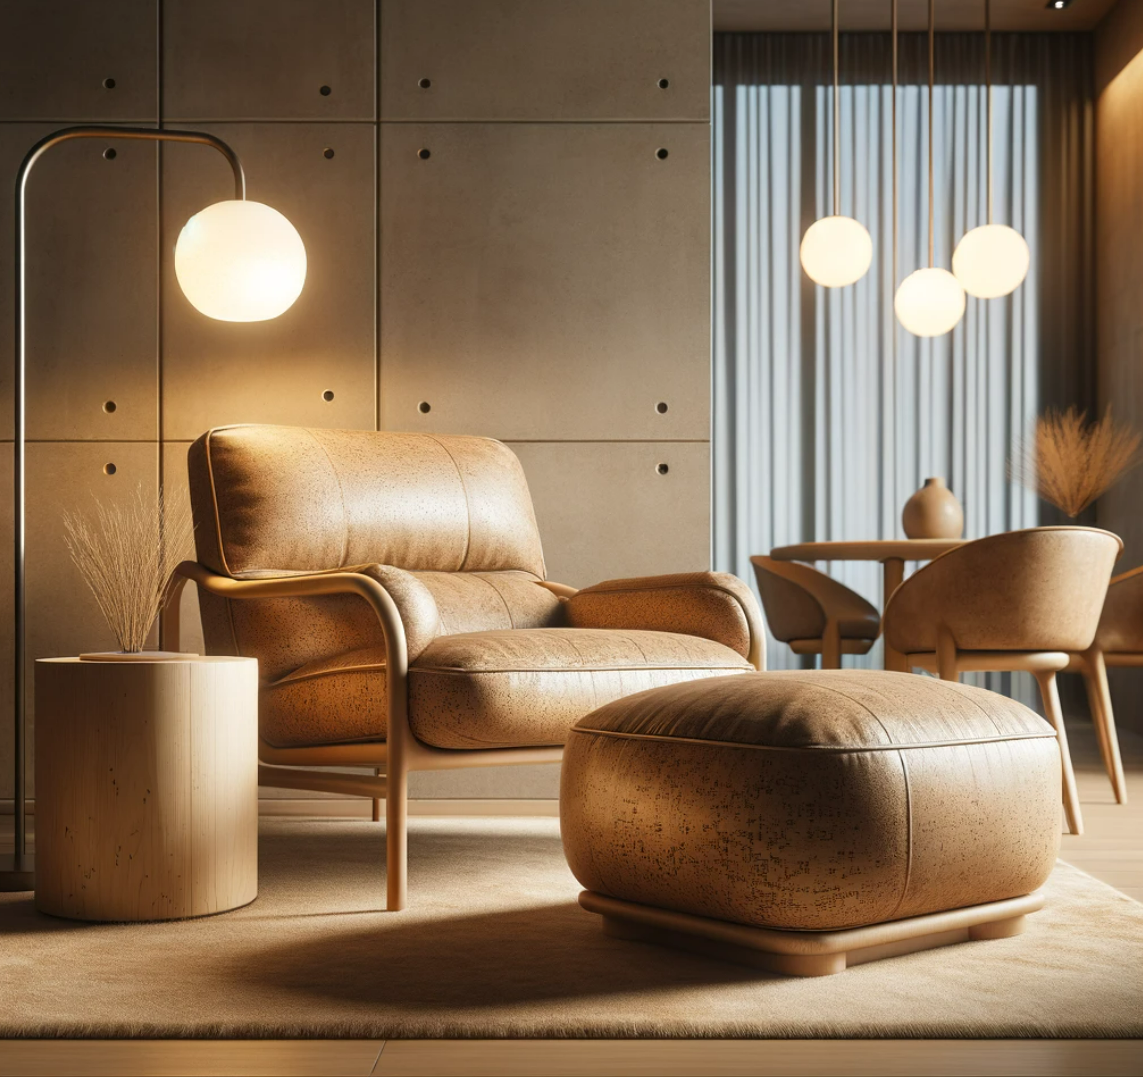 Ultra Waterproof & Wear-Resistant Cork Material for Furniture Upholstery | THE CORK COLLECTION